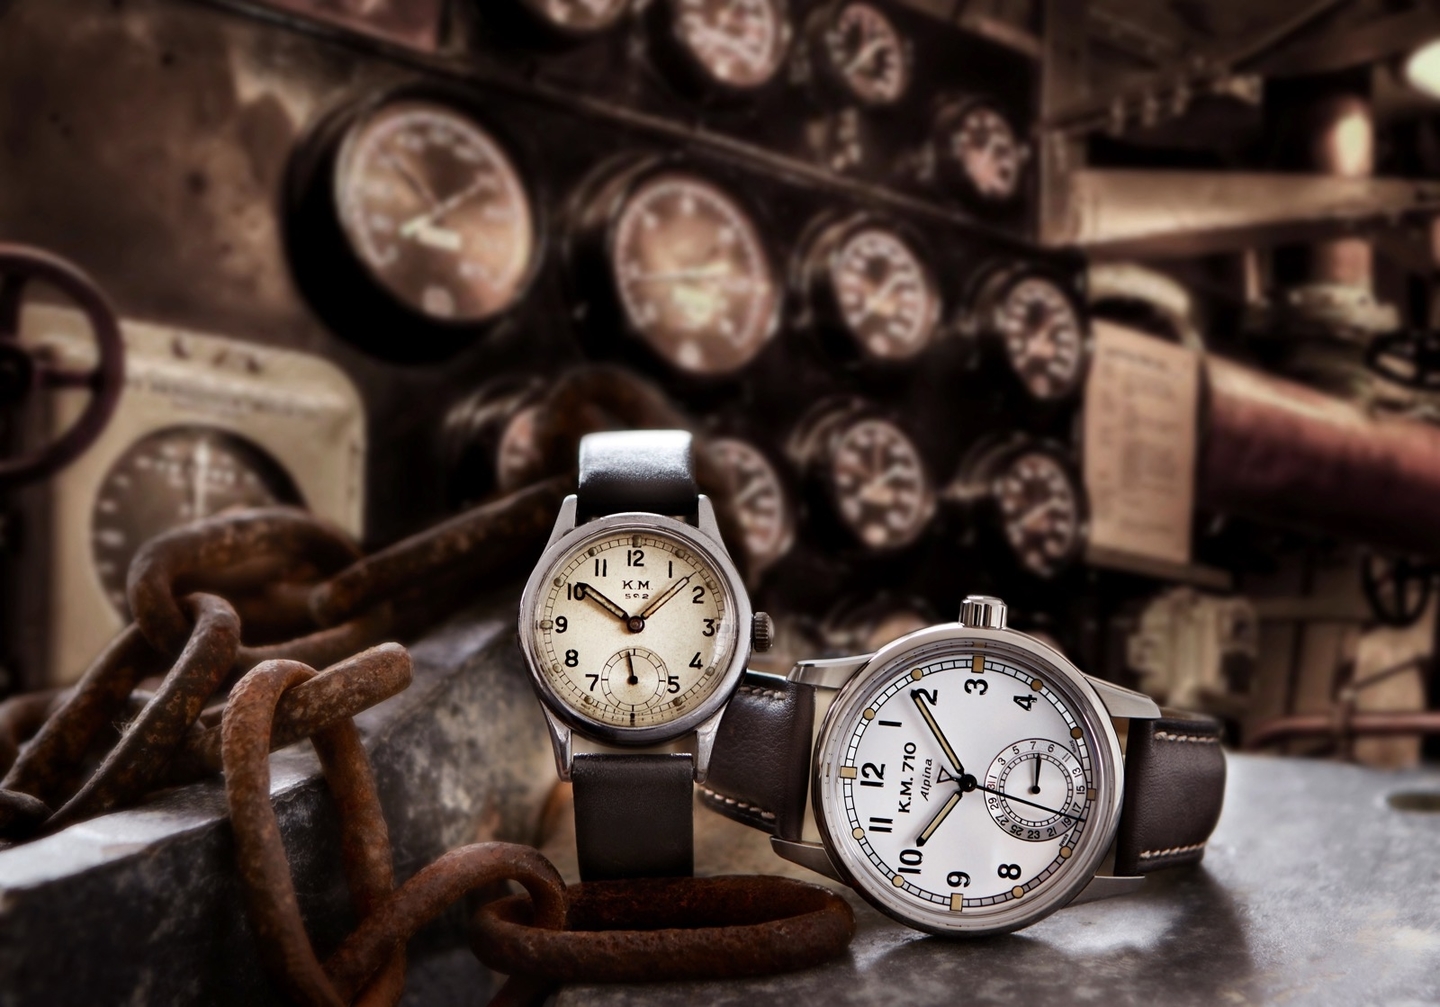 Introducing the Alpiner Heritage Manufacture KM-710